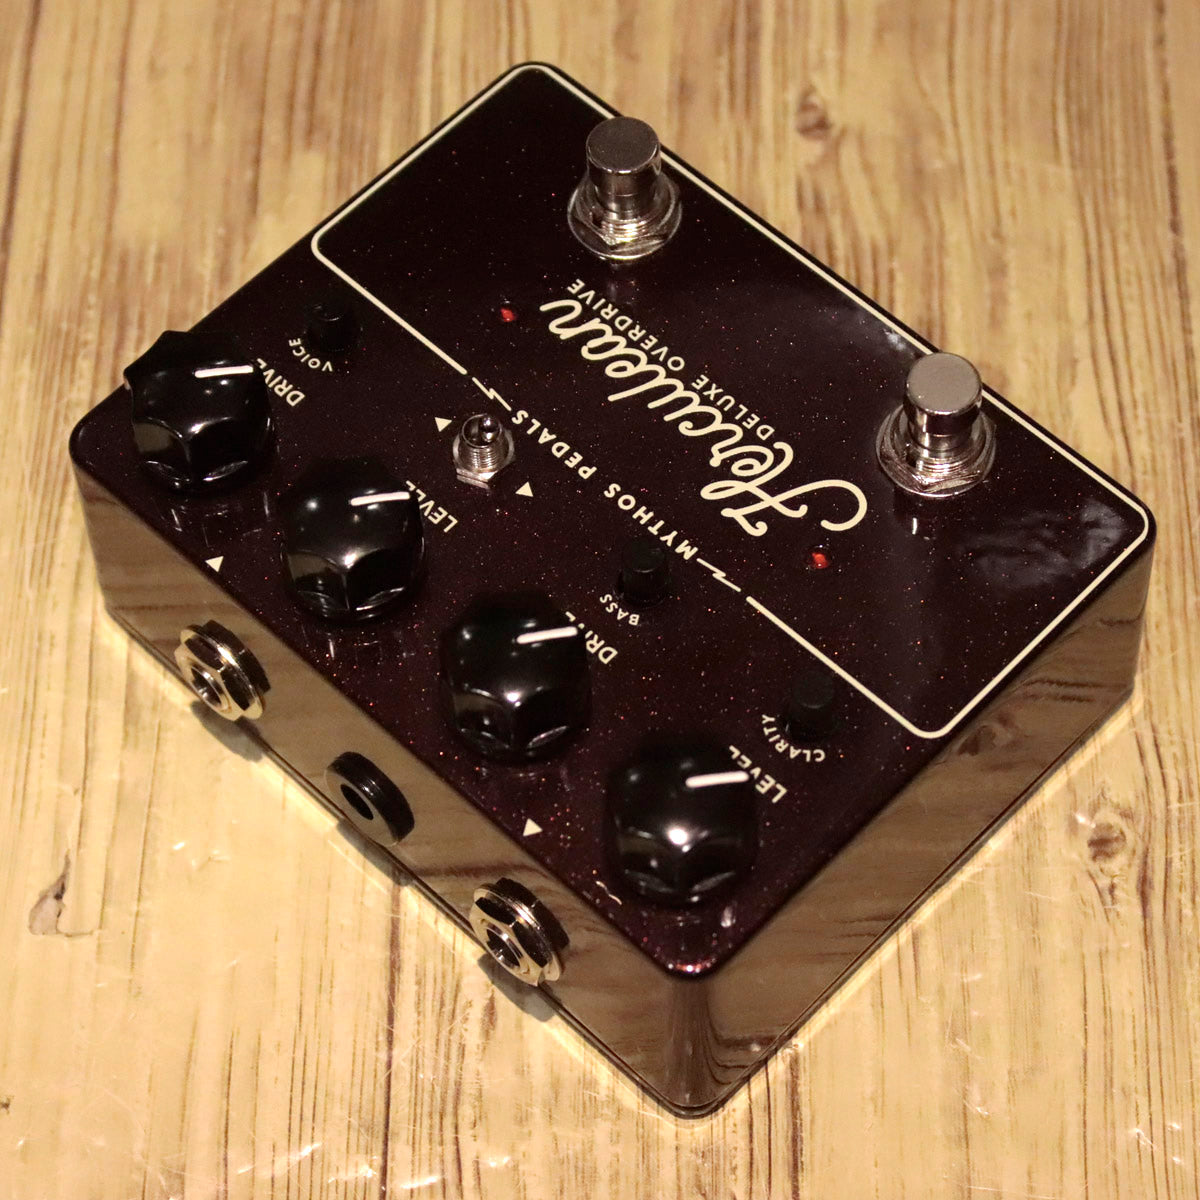 USED MYTHOS PEDALS / HERCULEAN DELUXE OVERDRIVE [12]